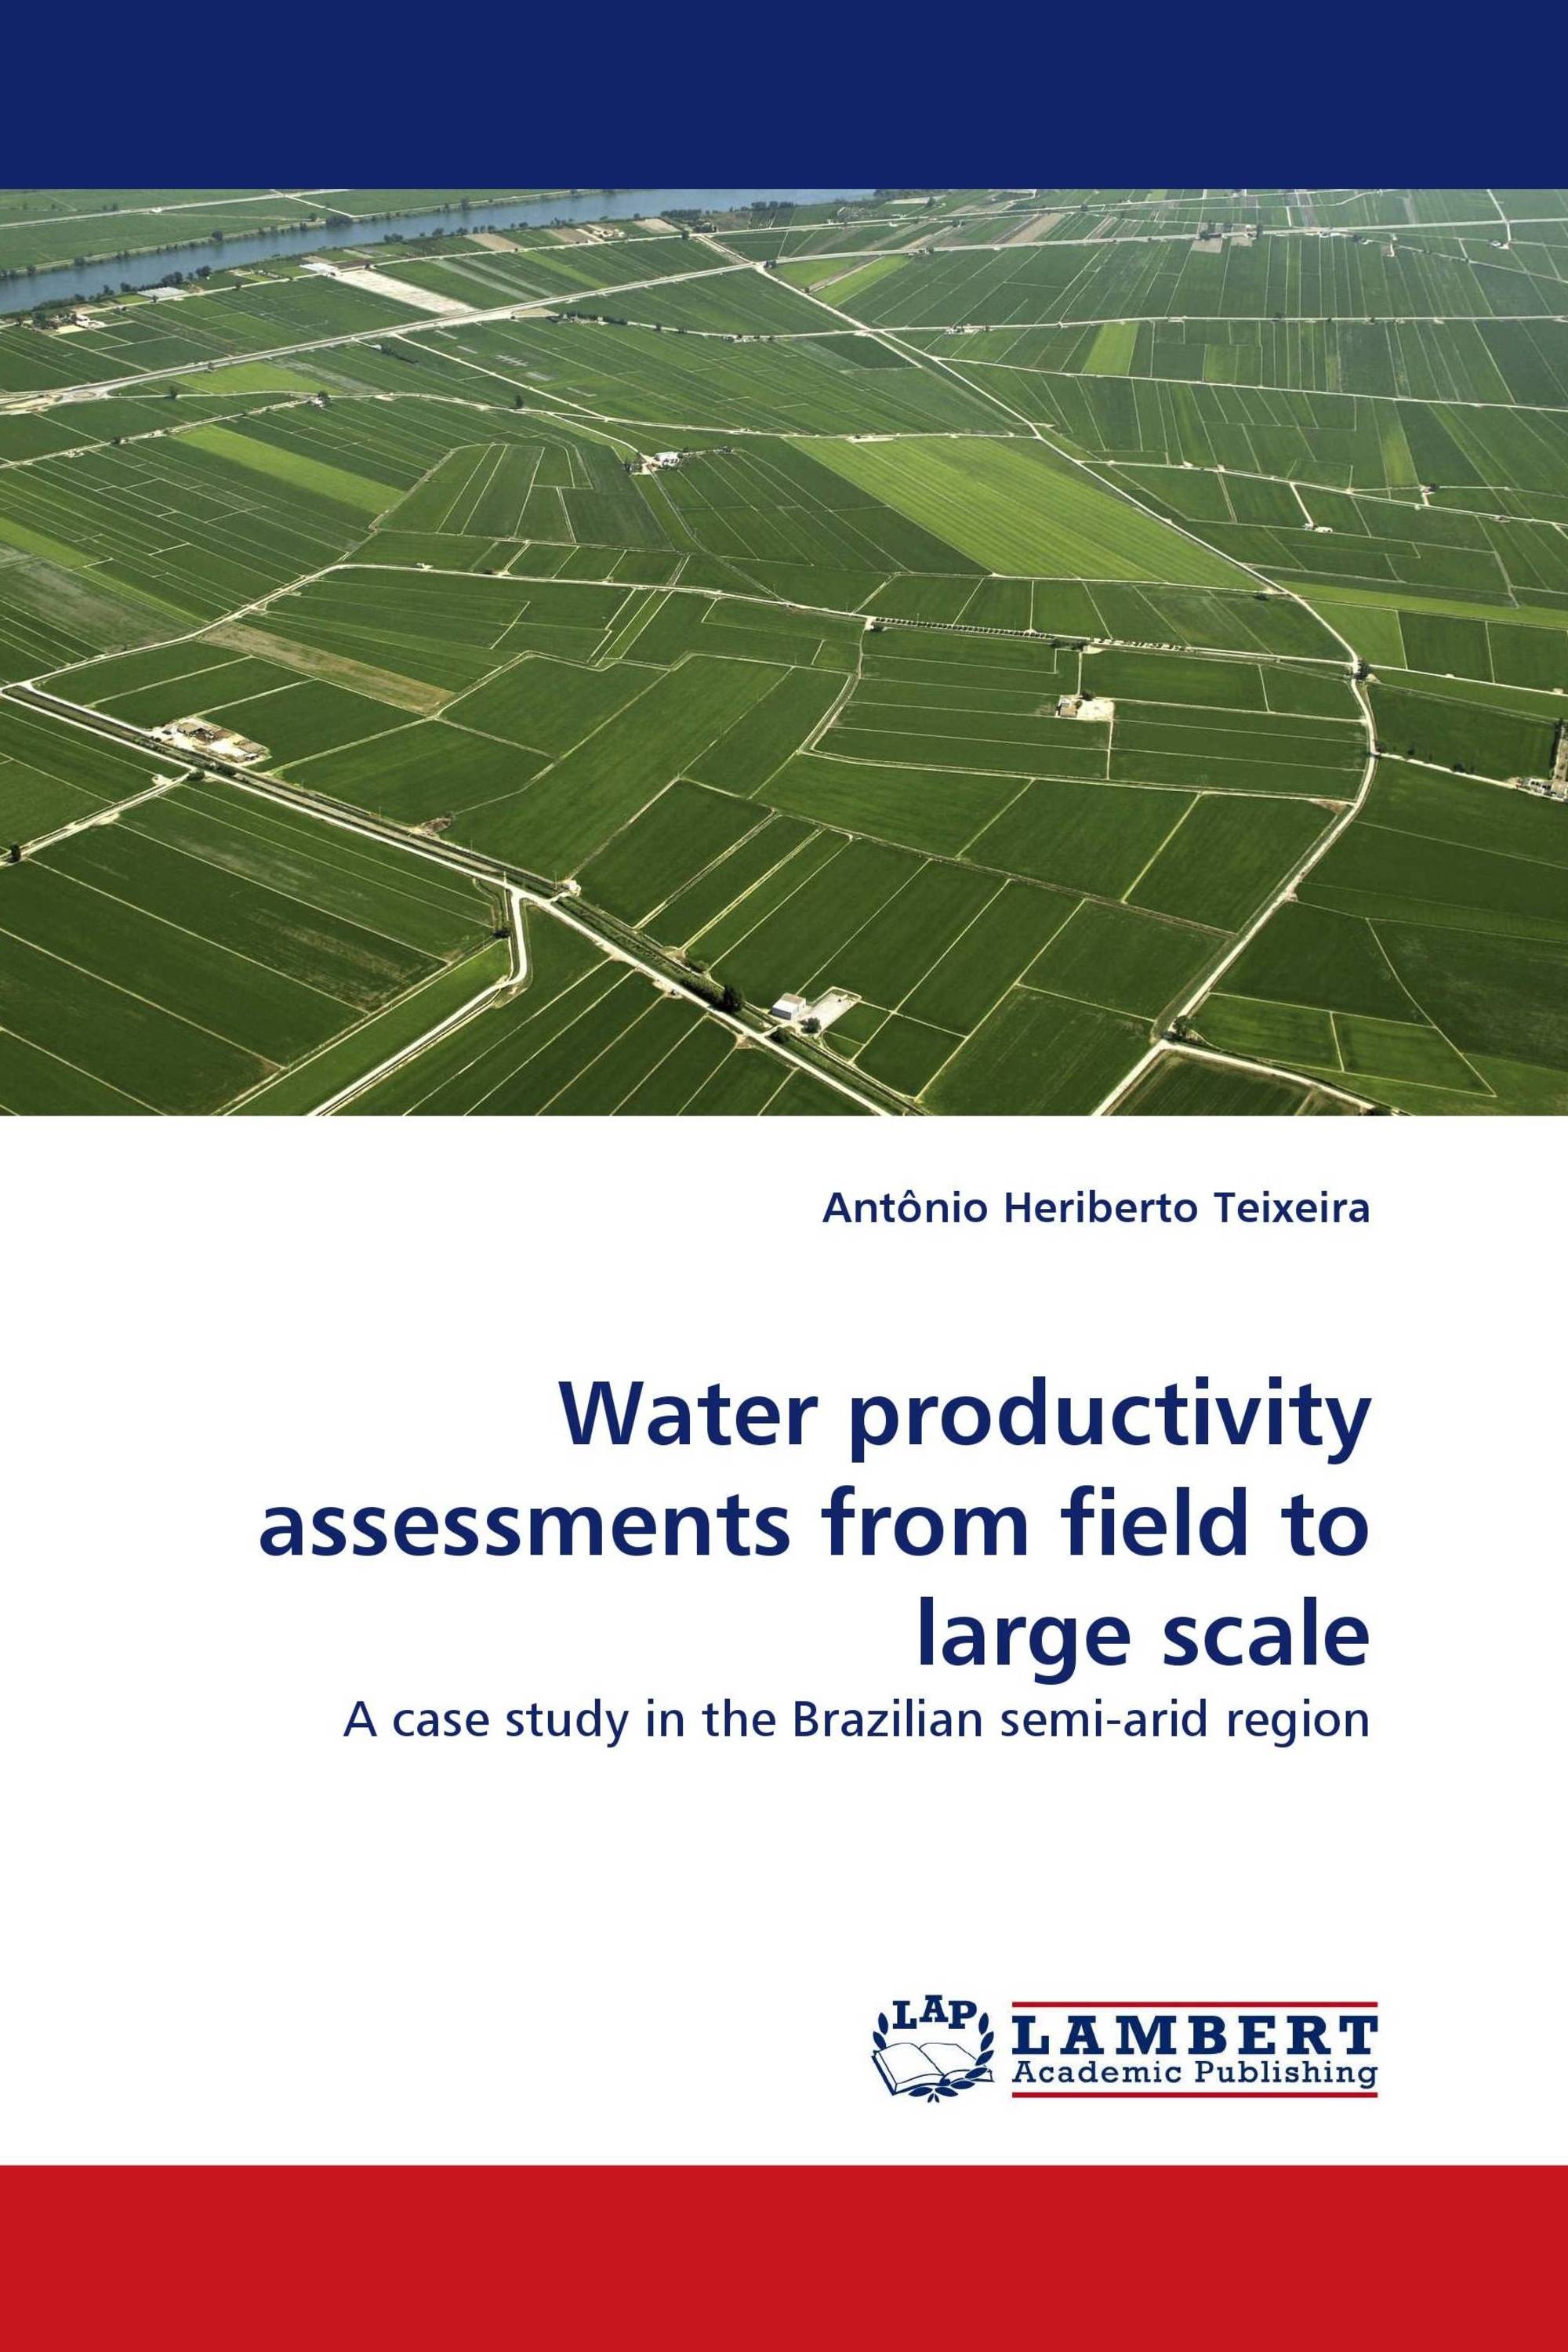 Water productivity assessments from field to large scale